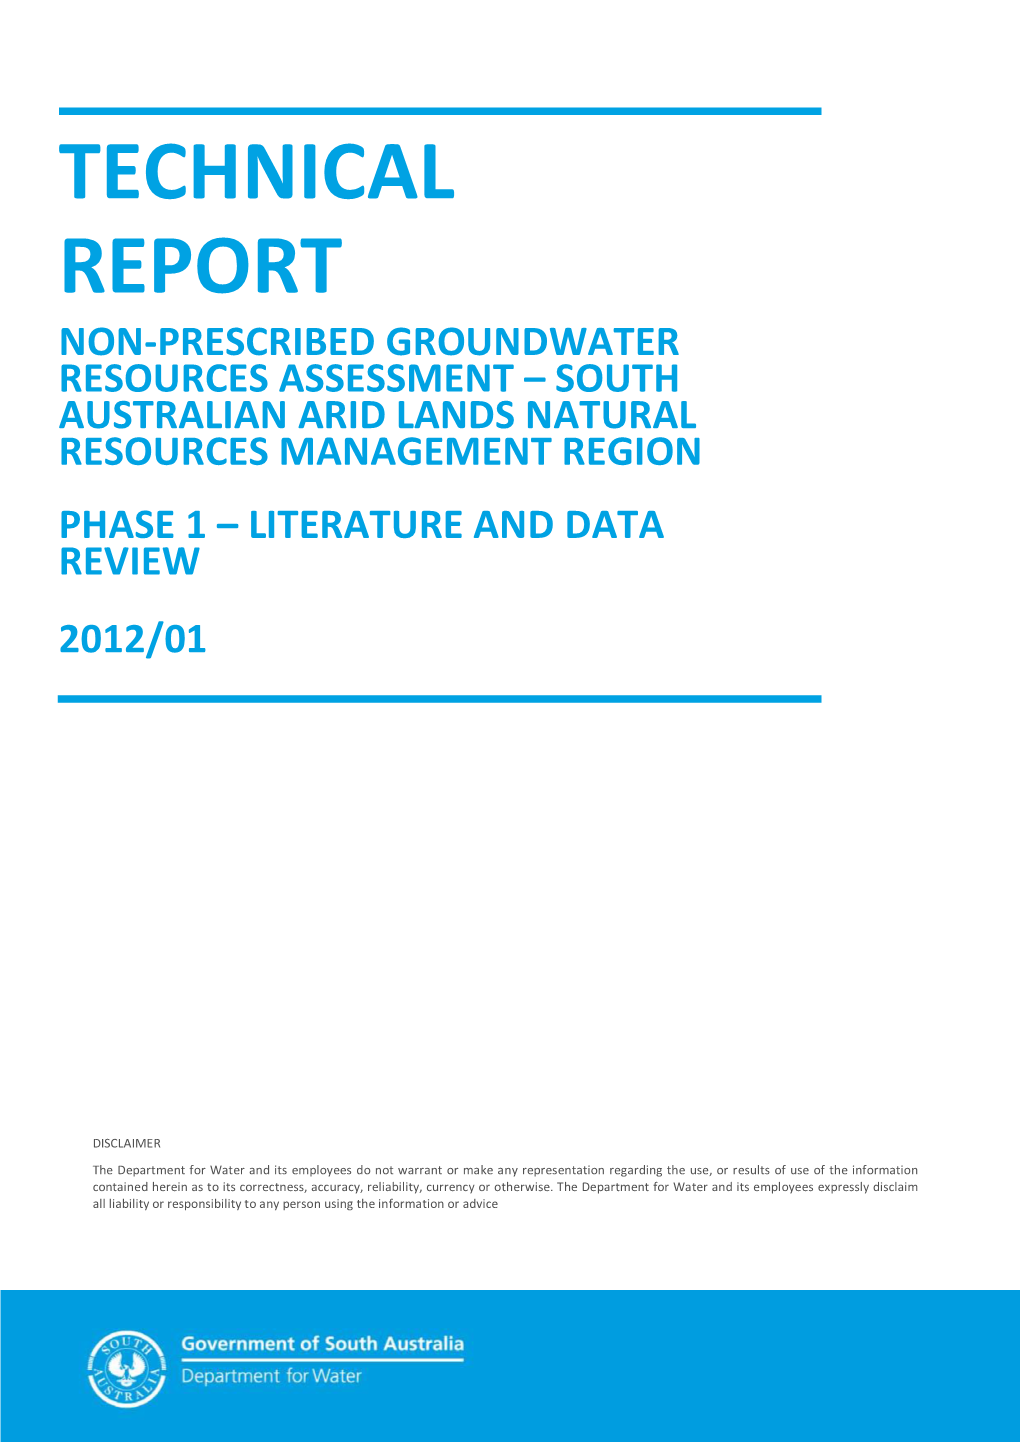 Non-Prescribed Groundwater Resources Assessment – South Australian Arid Lands Natural Resources Management Region